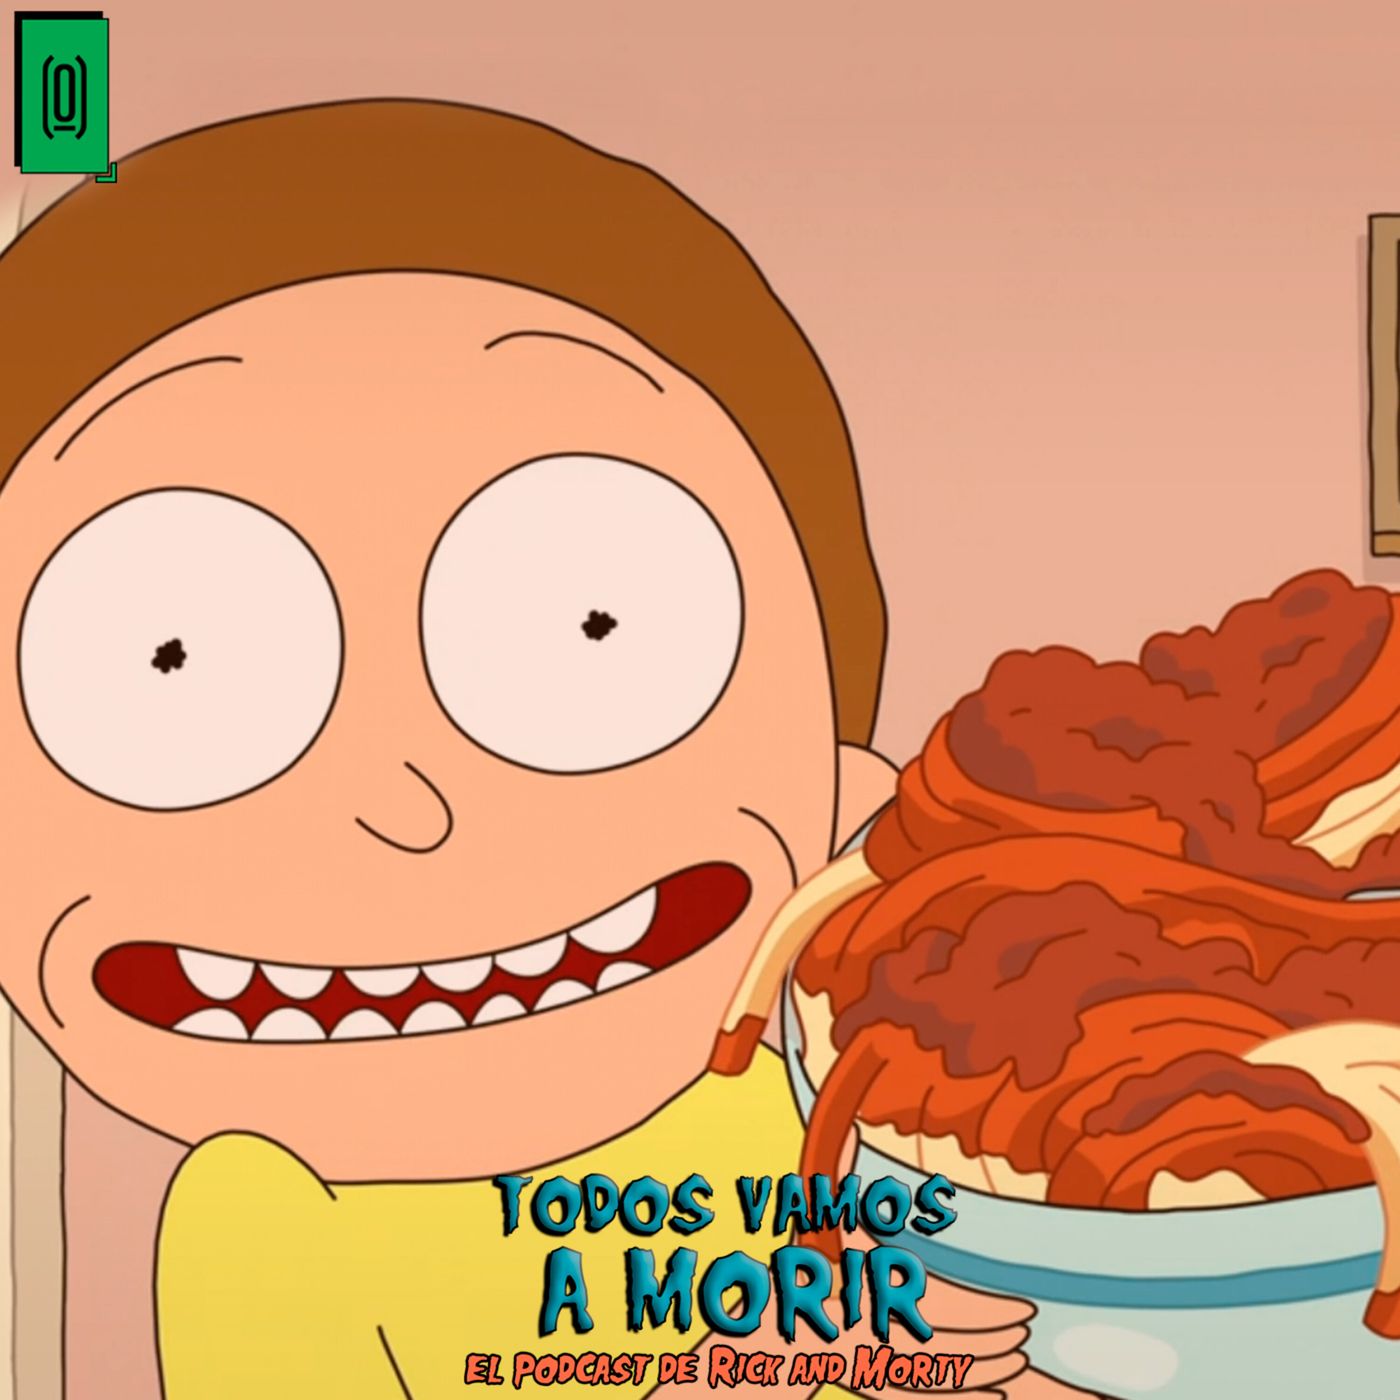 65: That's Amorte - Rick and Morty T7 E4